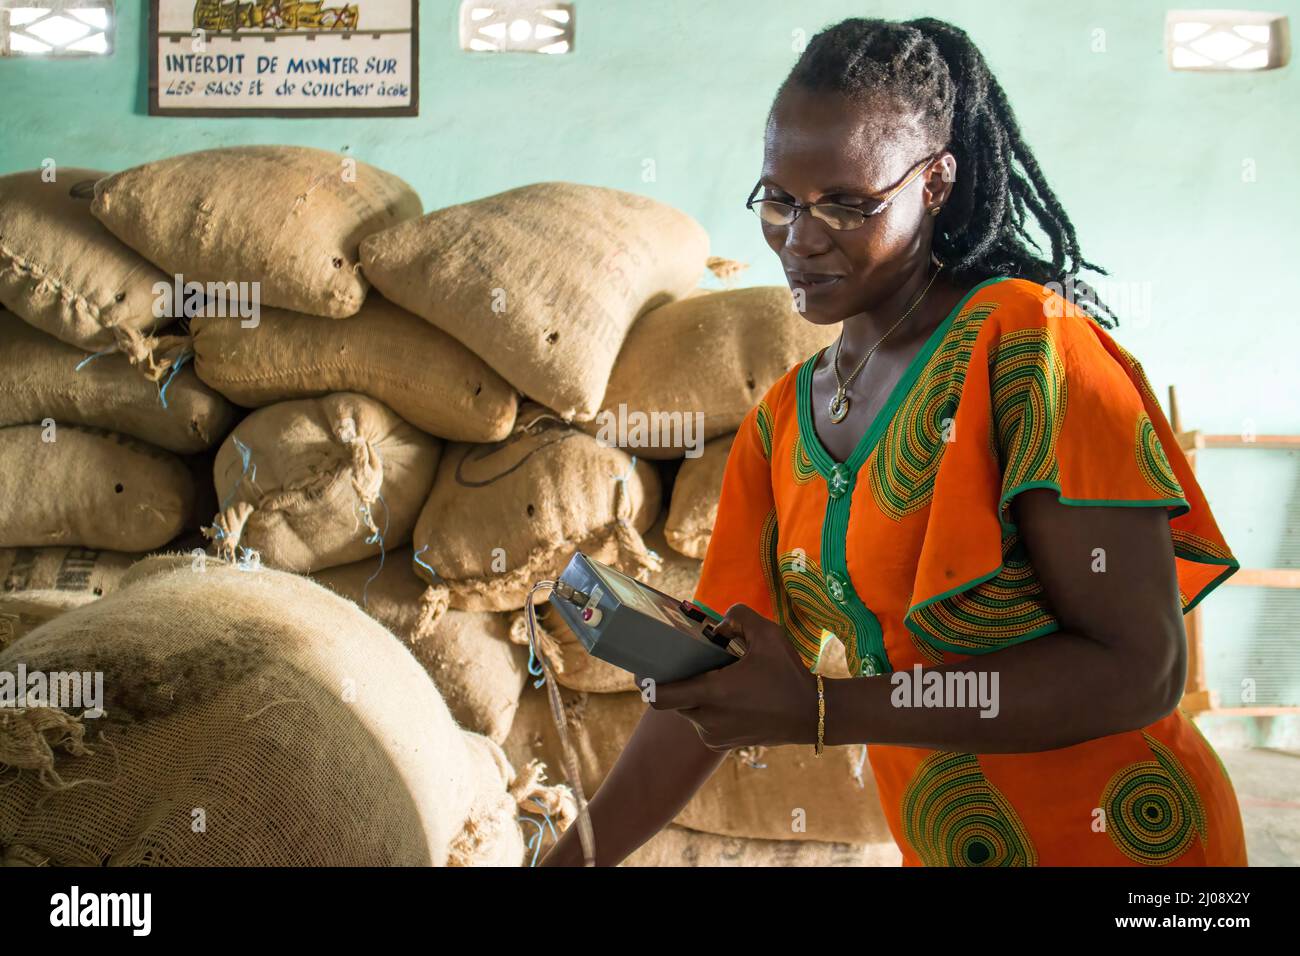 female cocoa warehouse manager, côte d'Ivoire Stock Photo